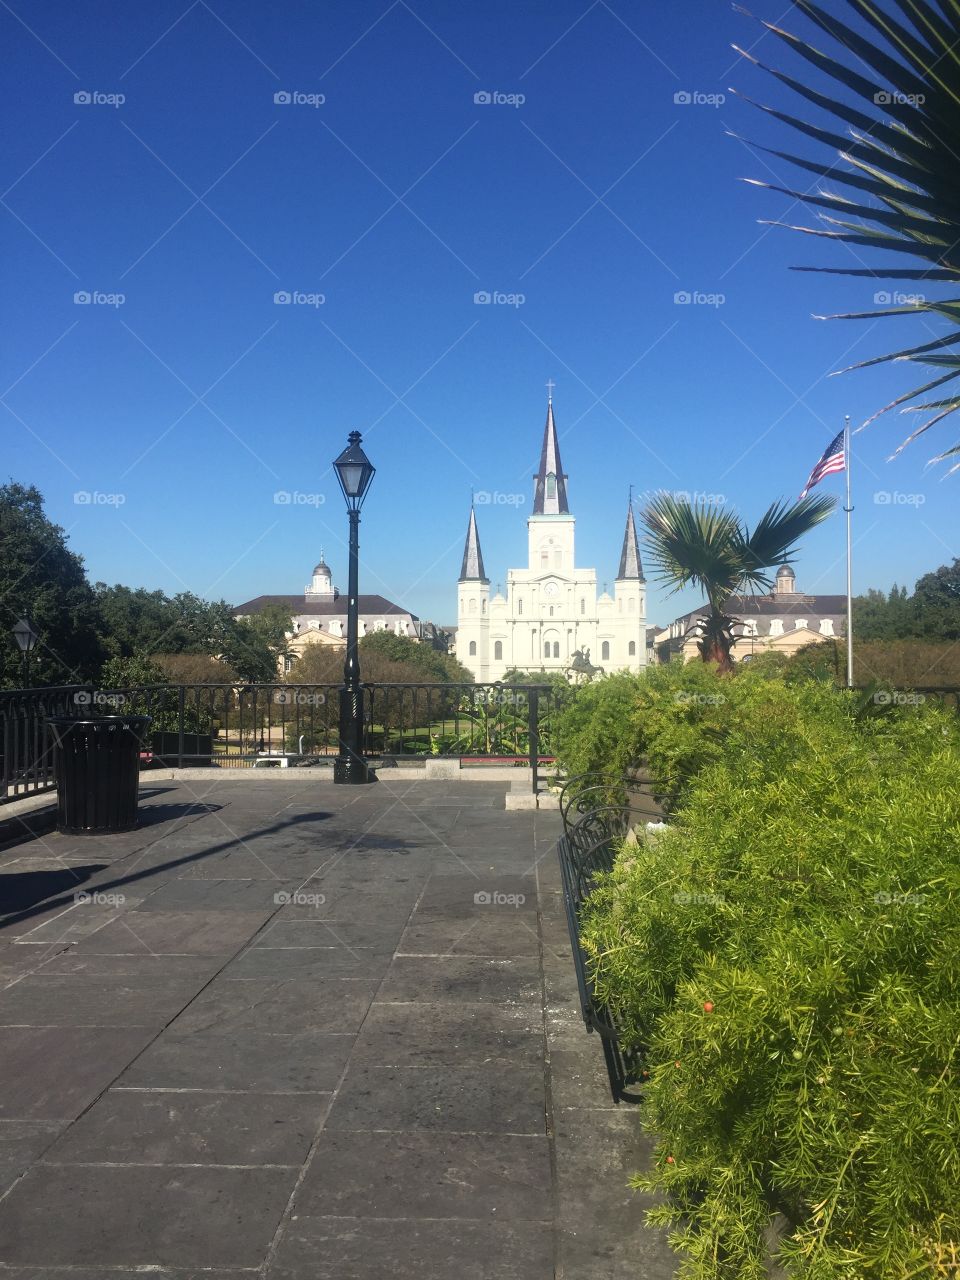 A distant morning view of Jackson Square in New Orleans